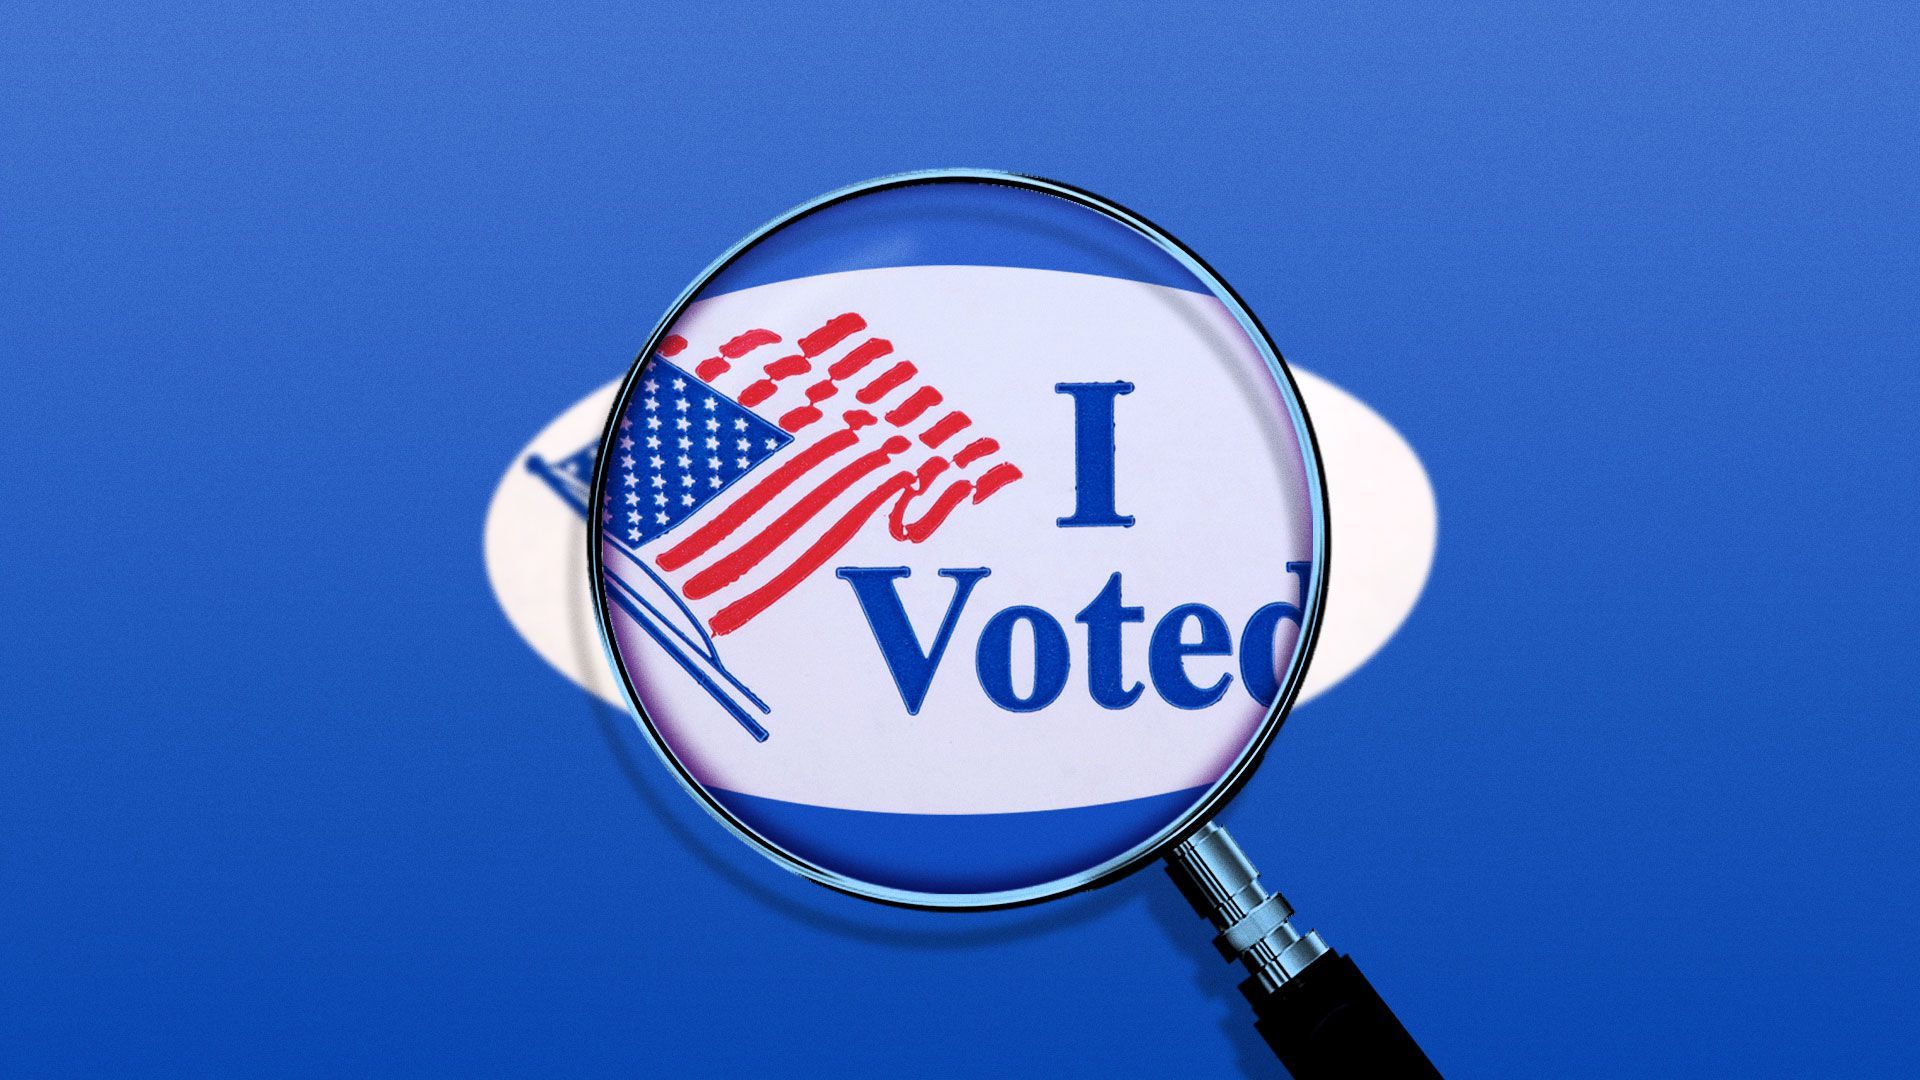 Illustration of a magnifying glass over a “I voted” sticker